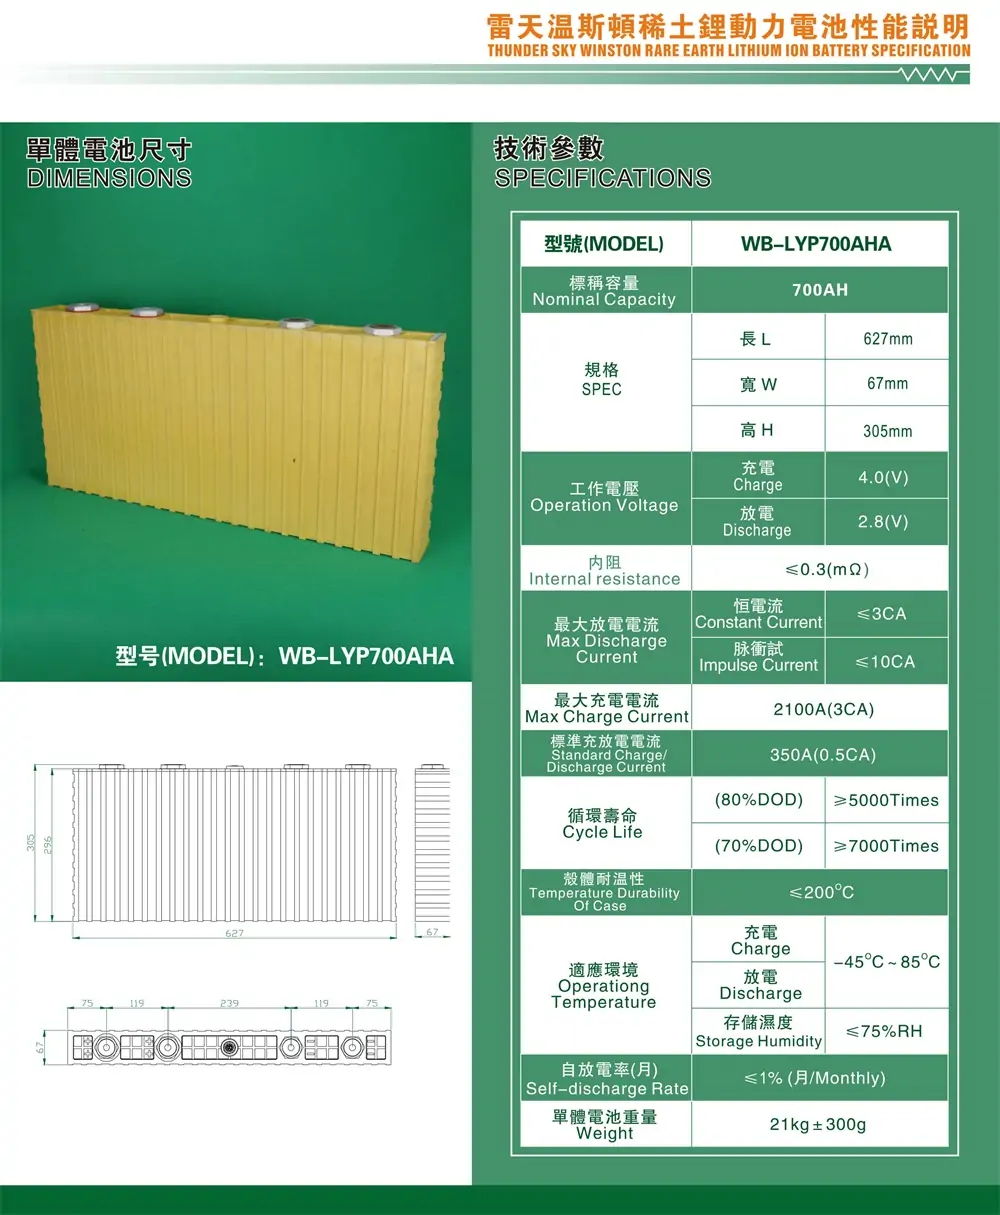 specifications of 700ah lifeypo4 battery cells